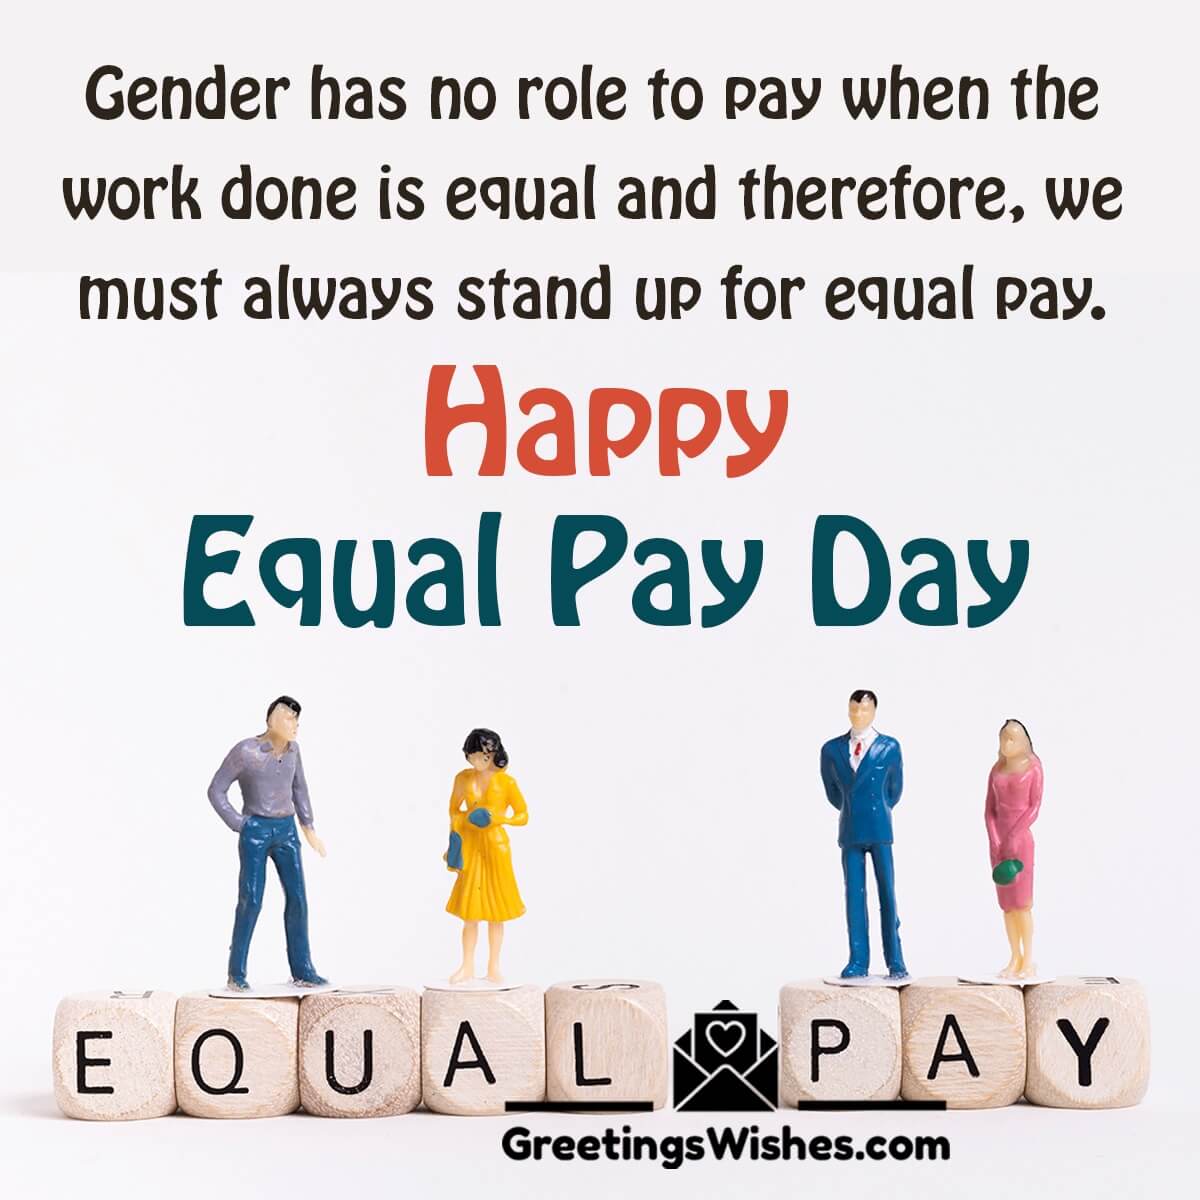 Happy Equal Pay Day